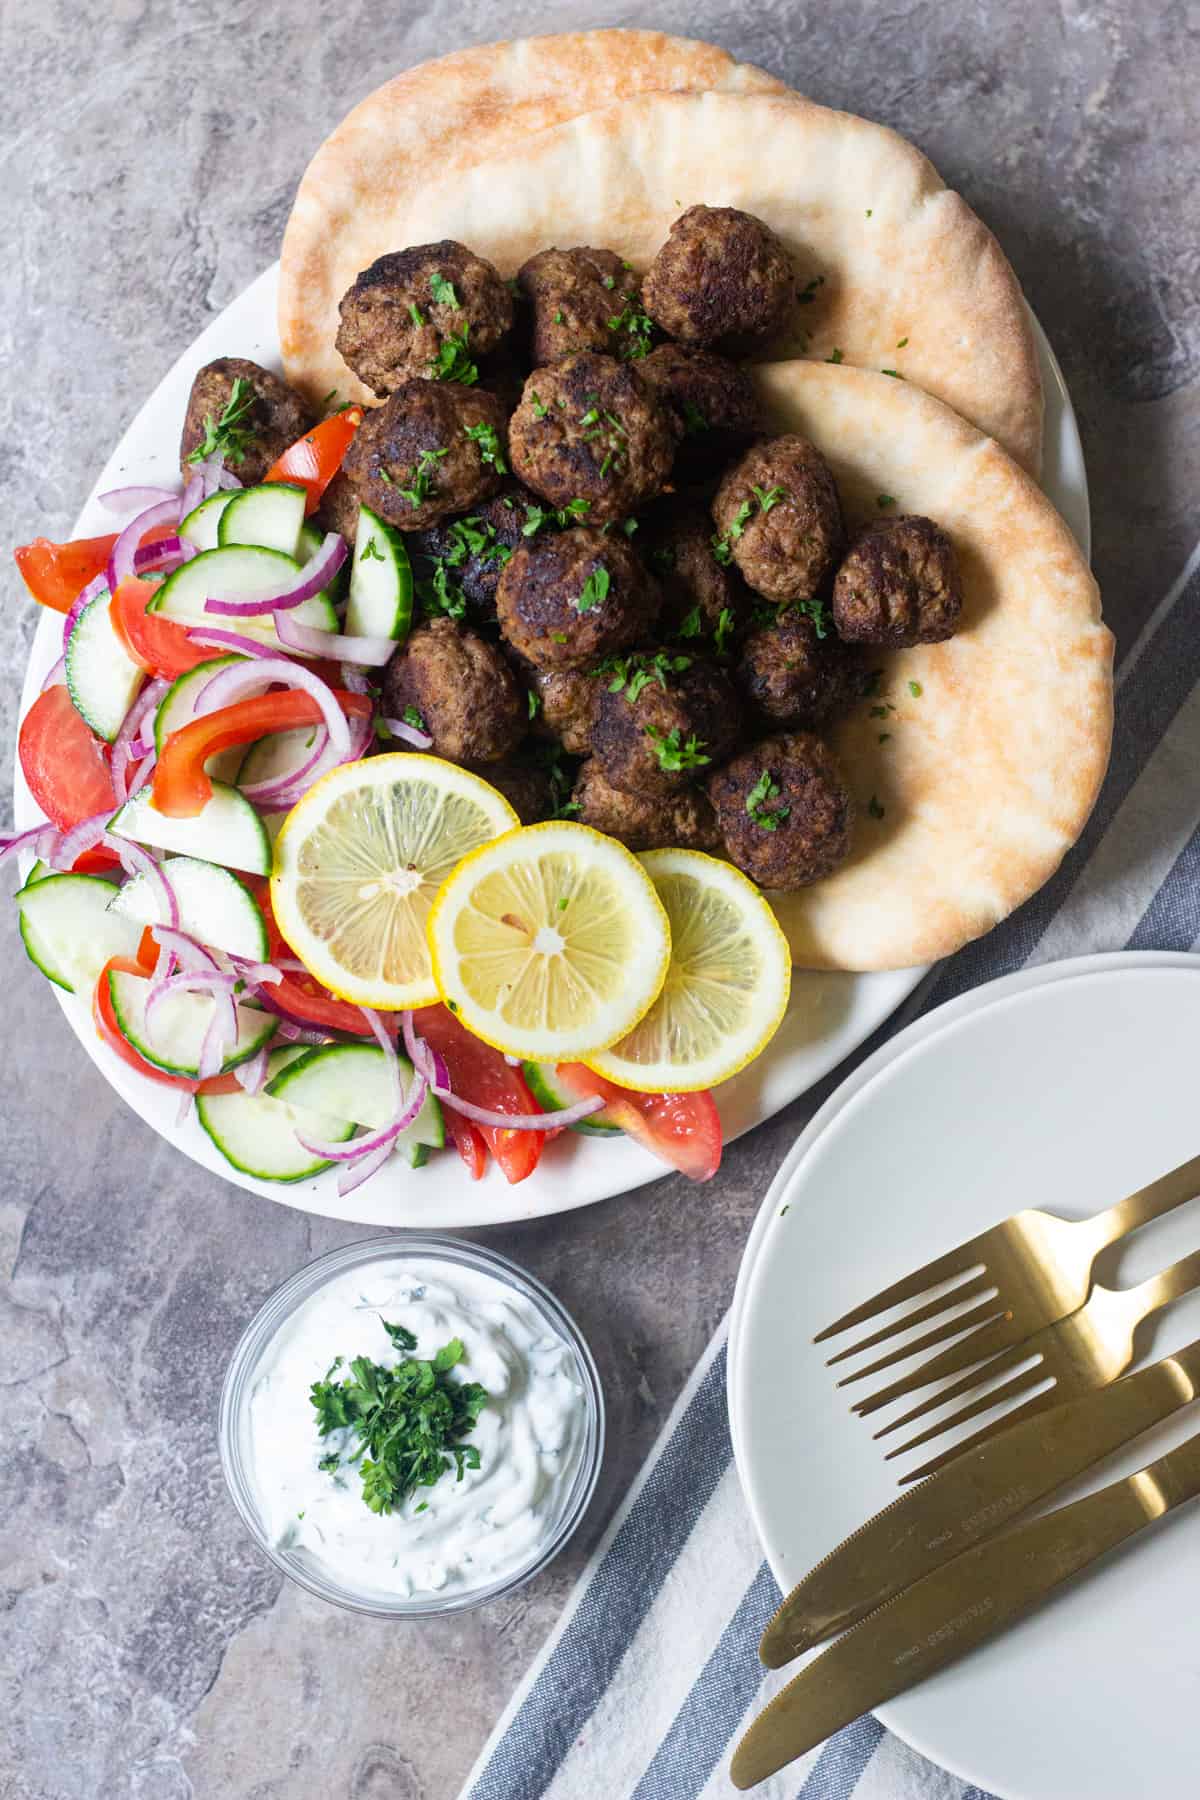 These Greek meatballs are a delicious treat! You can serve these meatballs as a crowd pleasing appetizer or a complete meal.